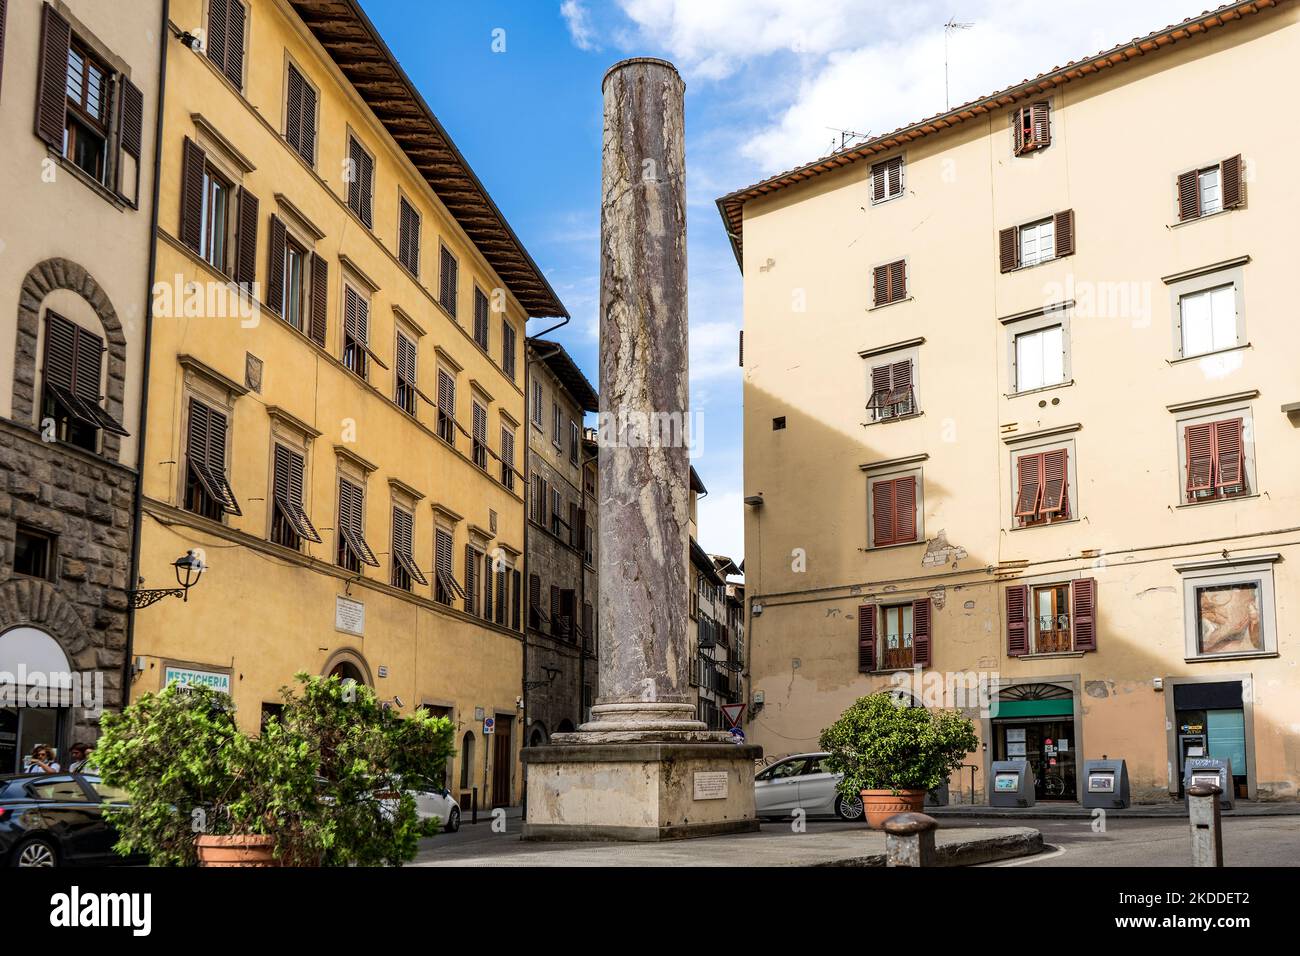 Piazza San Felice with the Column of Cosimo I de Medici and Guidi Palace on the left side, near Pitti Palace, in Oltrarno quarter, Tuscany, Italy Stock Photo